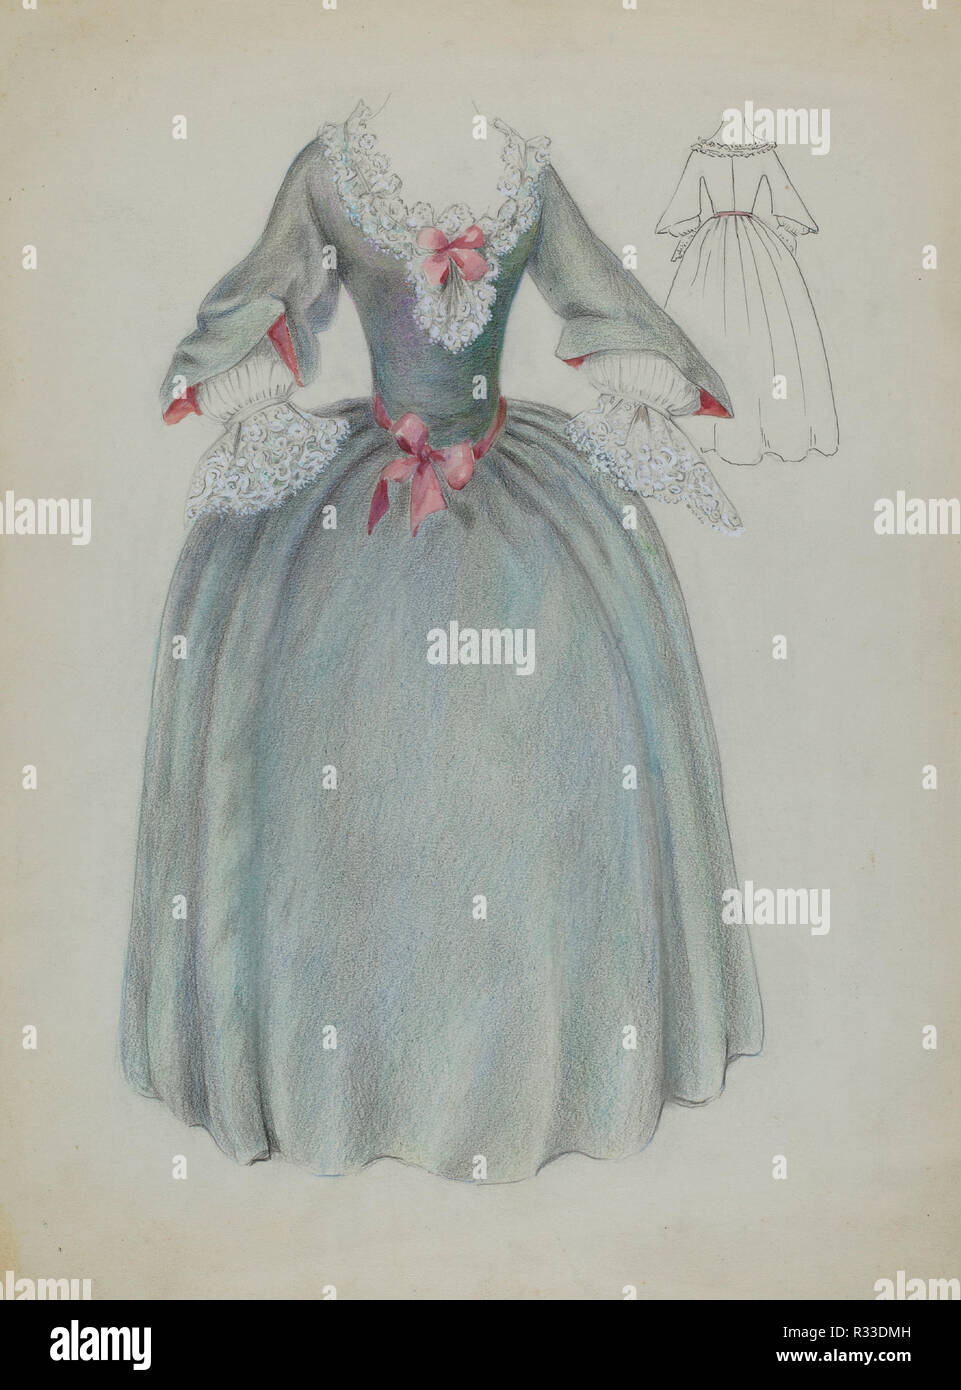 Dress. Dated: c. 1936. Dimensions: overall: 30.6 x 23 cm (12 1/16 x 9 1/16 in.). Medium: graphite, colored pencil, pen and ink, and gouacheon paper. Museum: National Gallery of Art, Washington DC. Author: Jessie M. Benge. Stock Photo